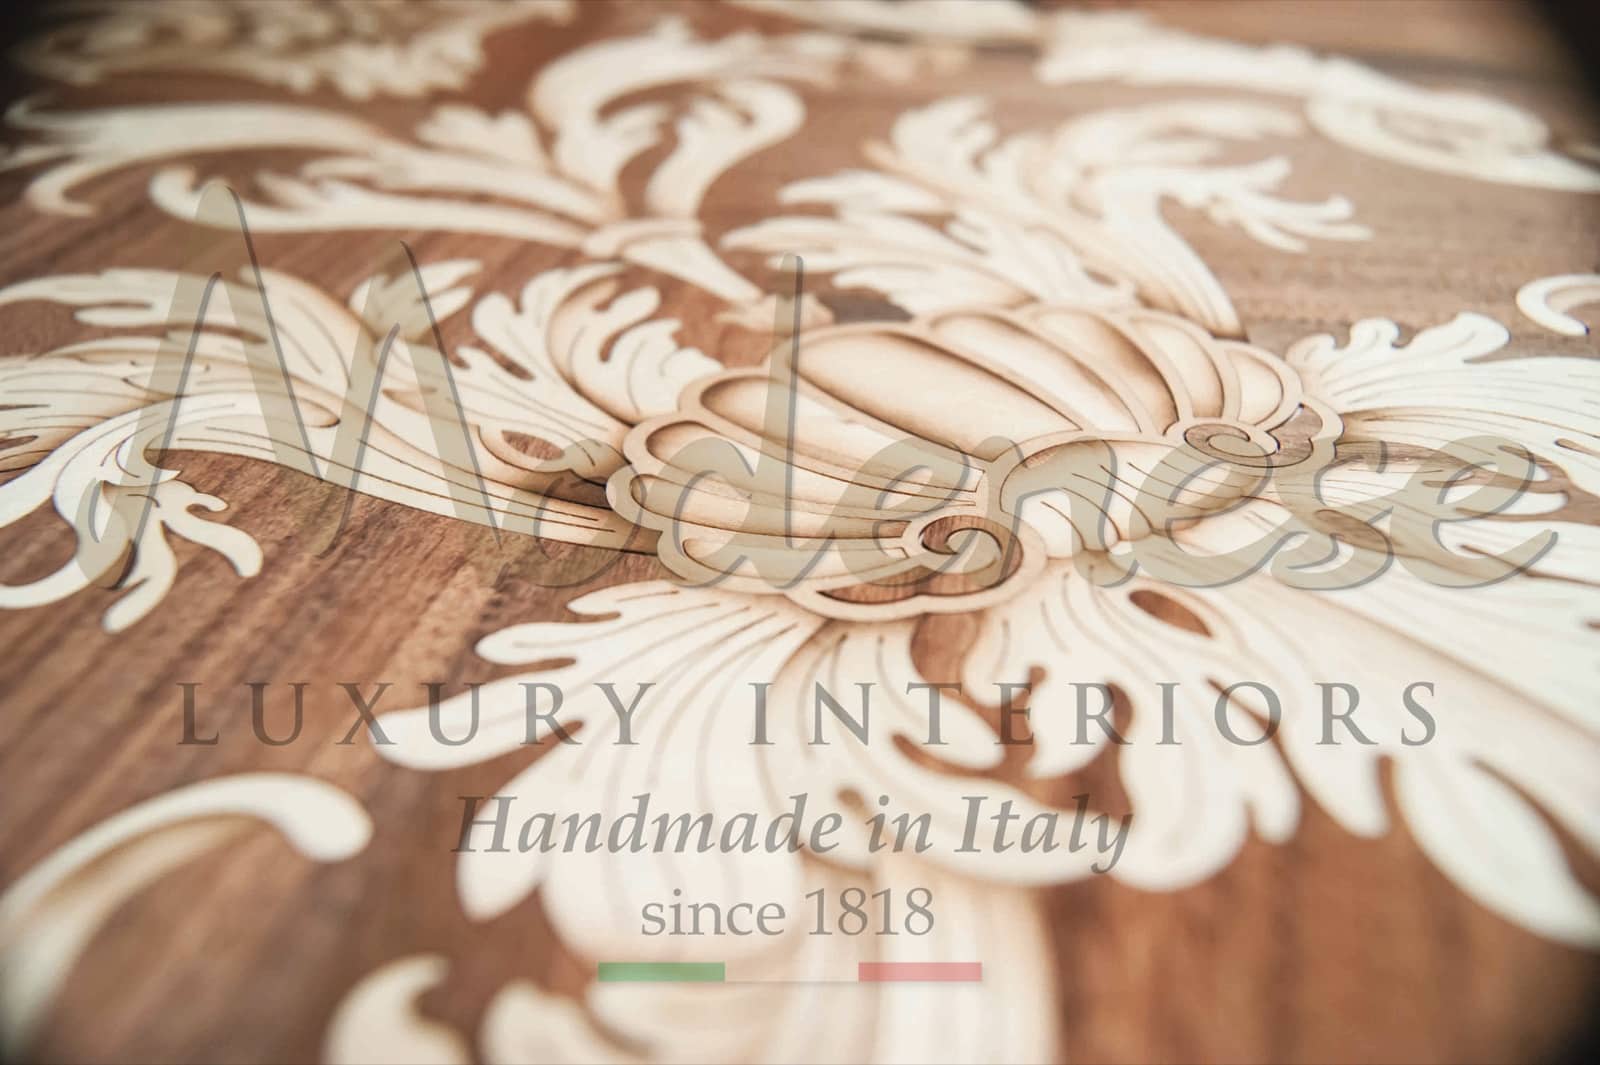 inlay wood inlayed furniture table marquetries wooden decoration baroque classic luxury interiors interior design ideas royal empire style luxurious living mother pearl customized personalized home décor masterpieces timeless taste